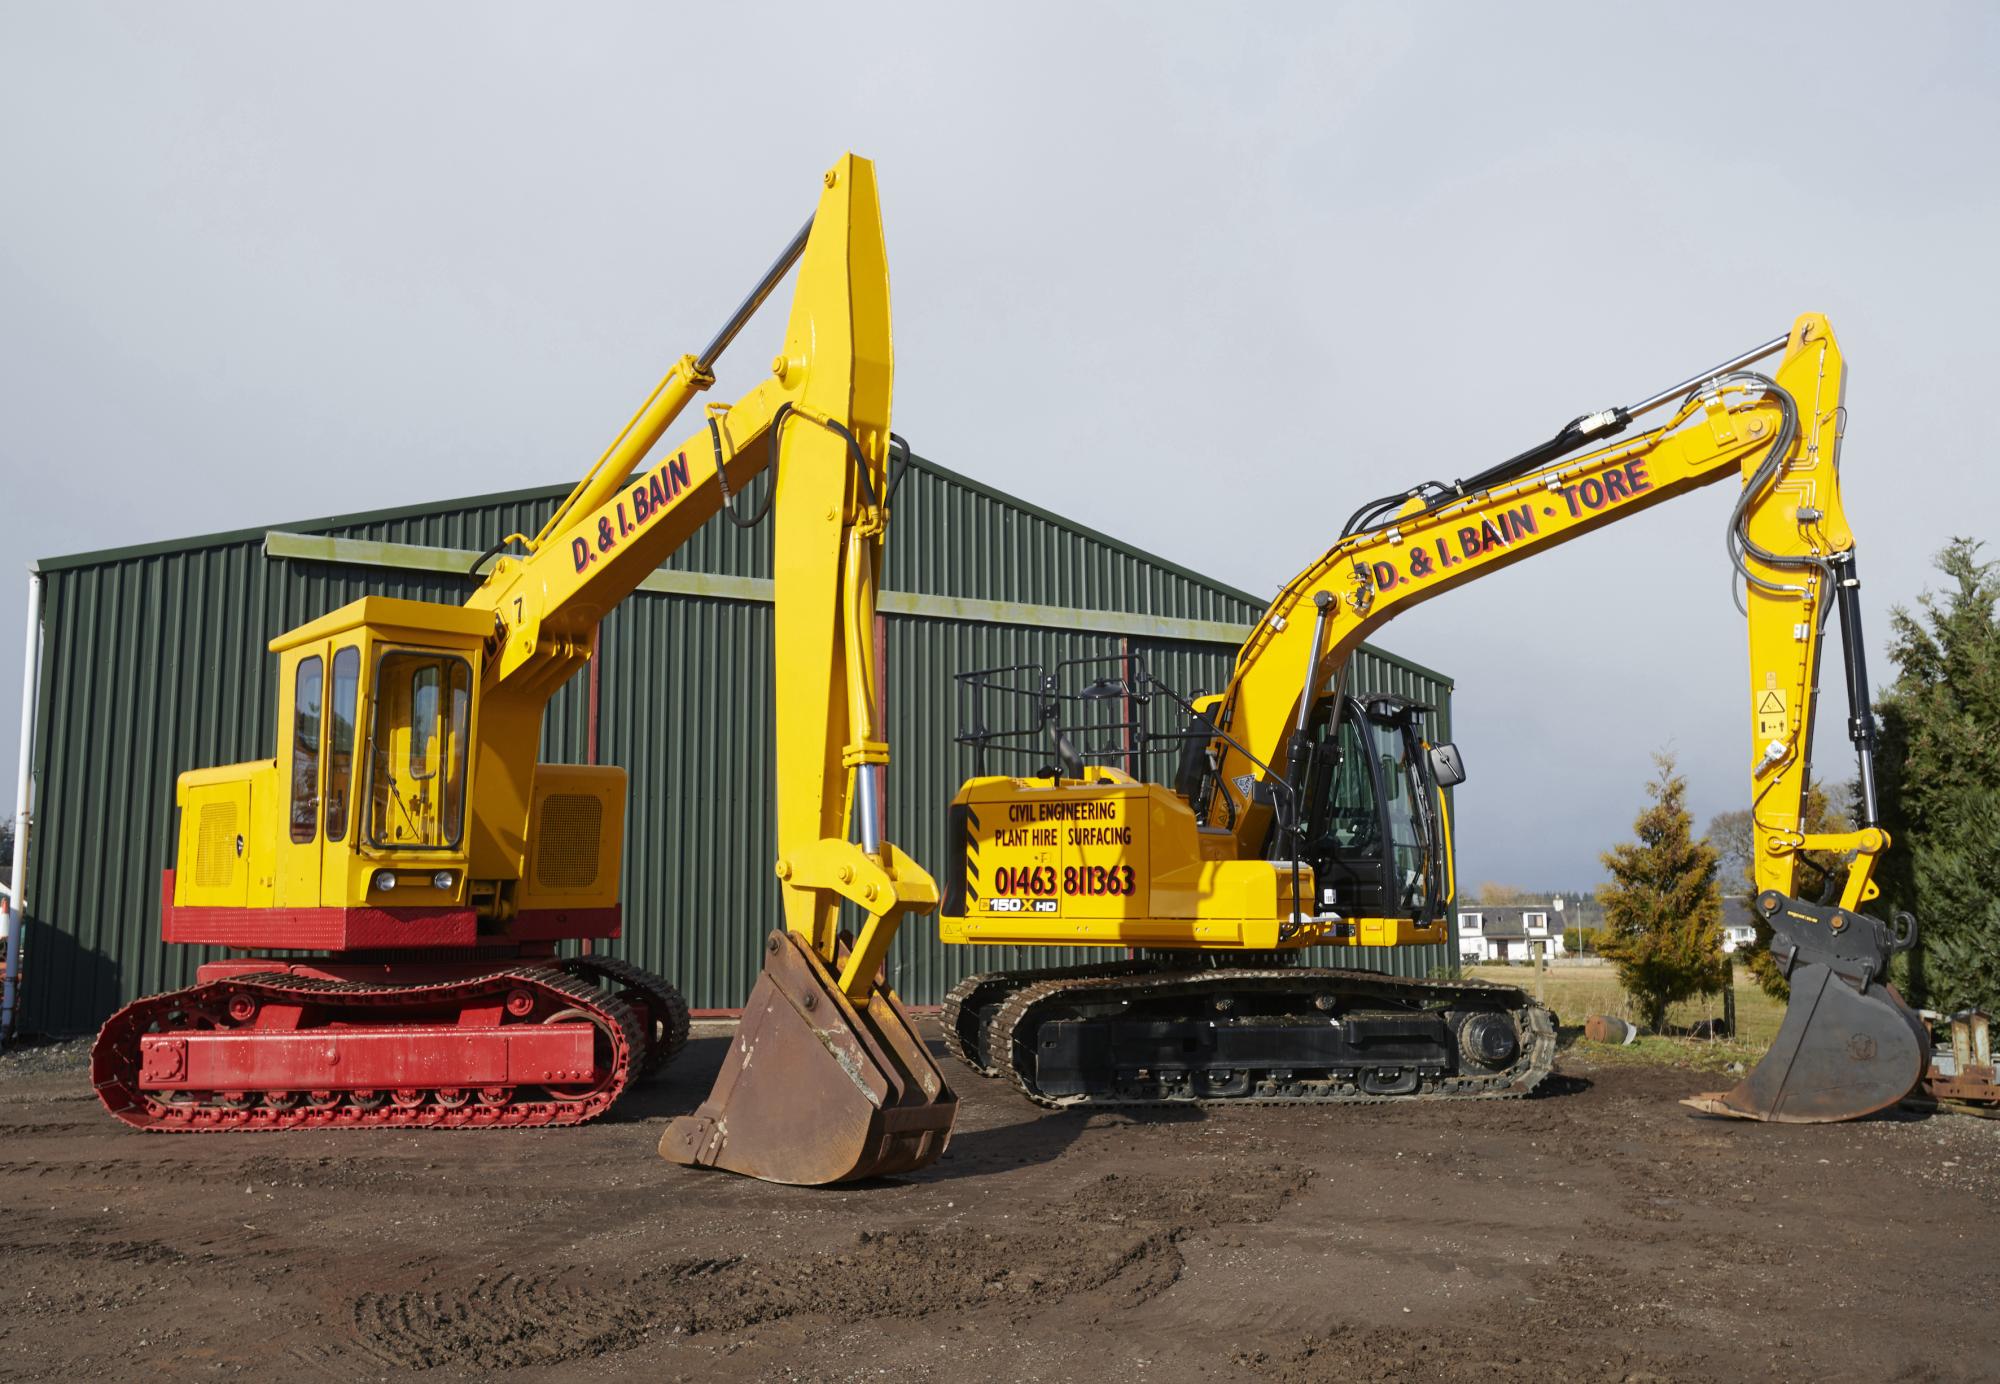 Muir of Ord contractor cements relationship with JCB